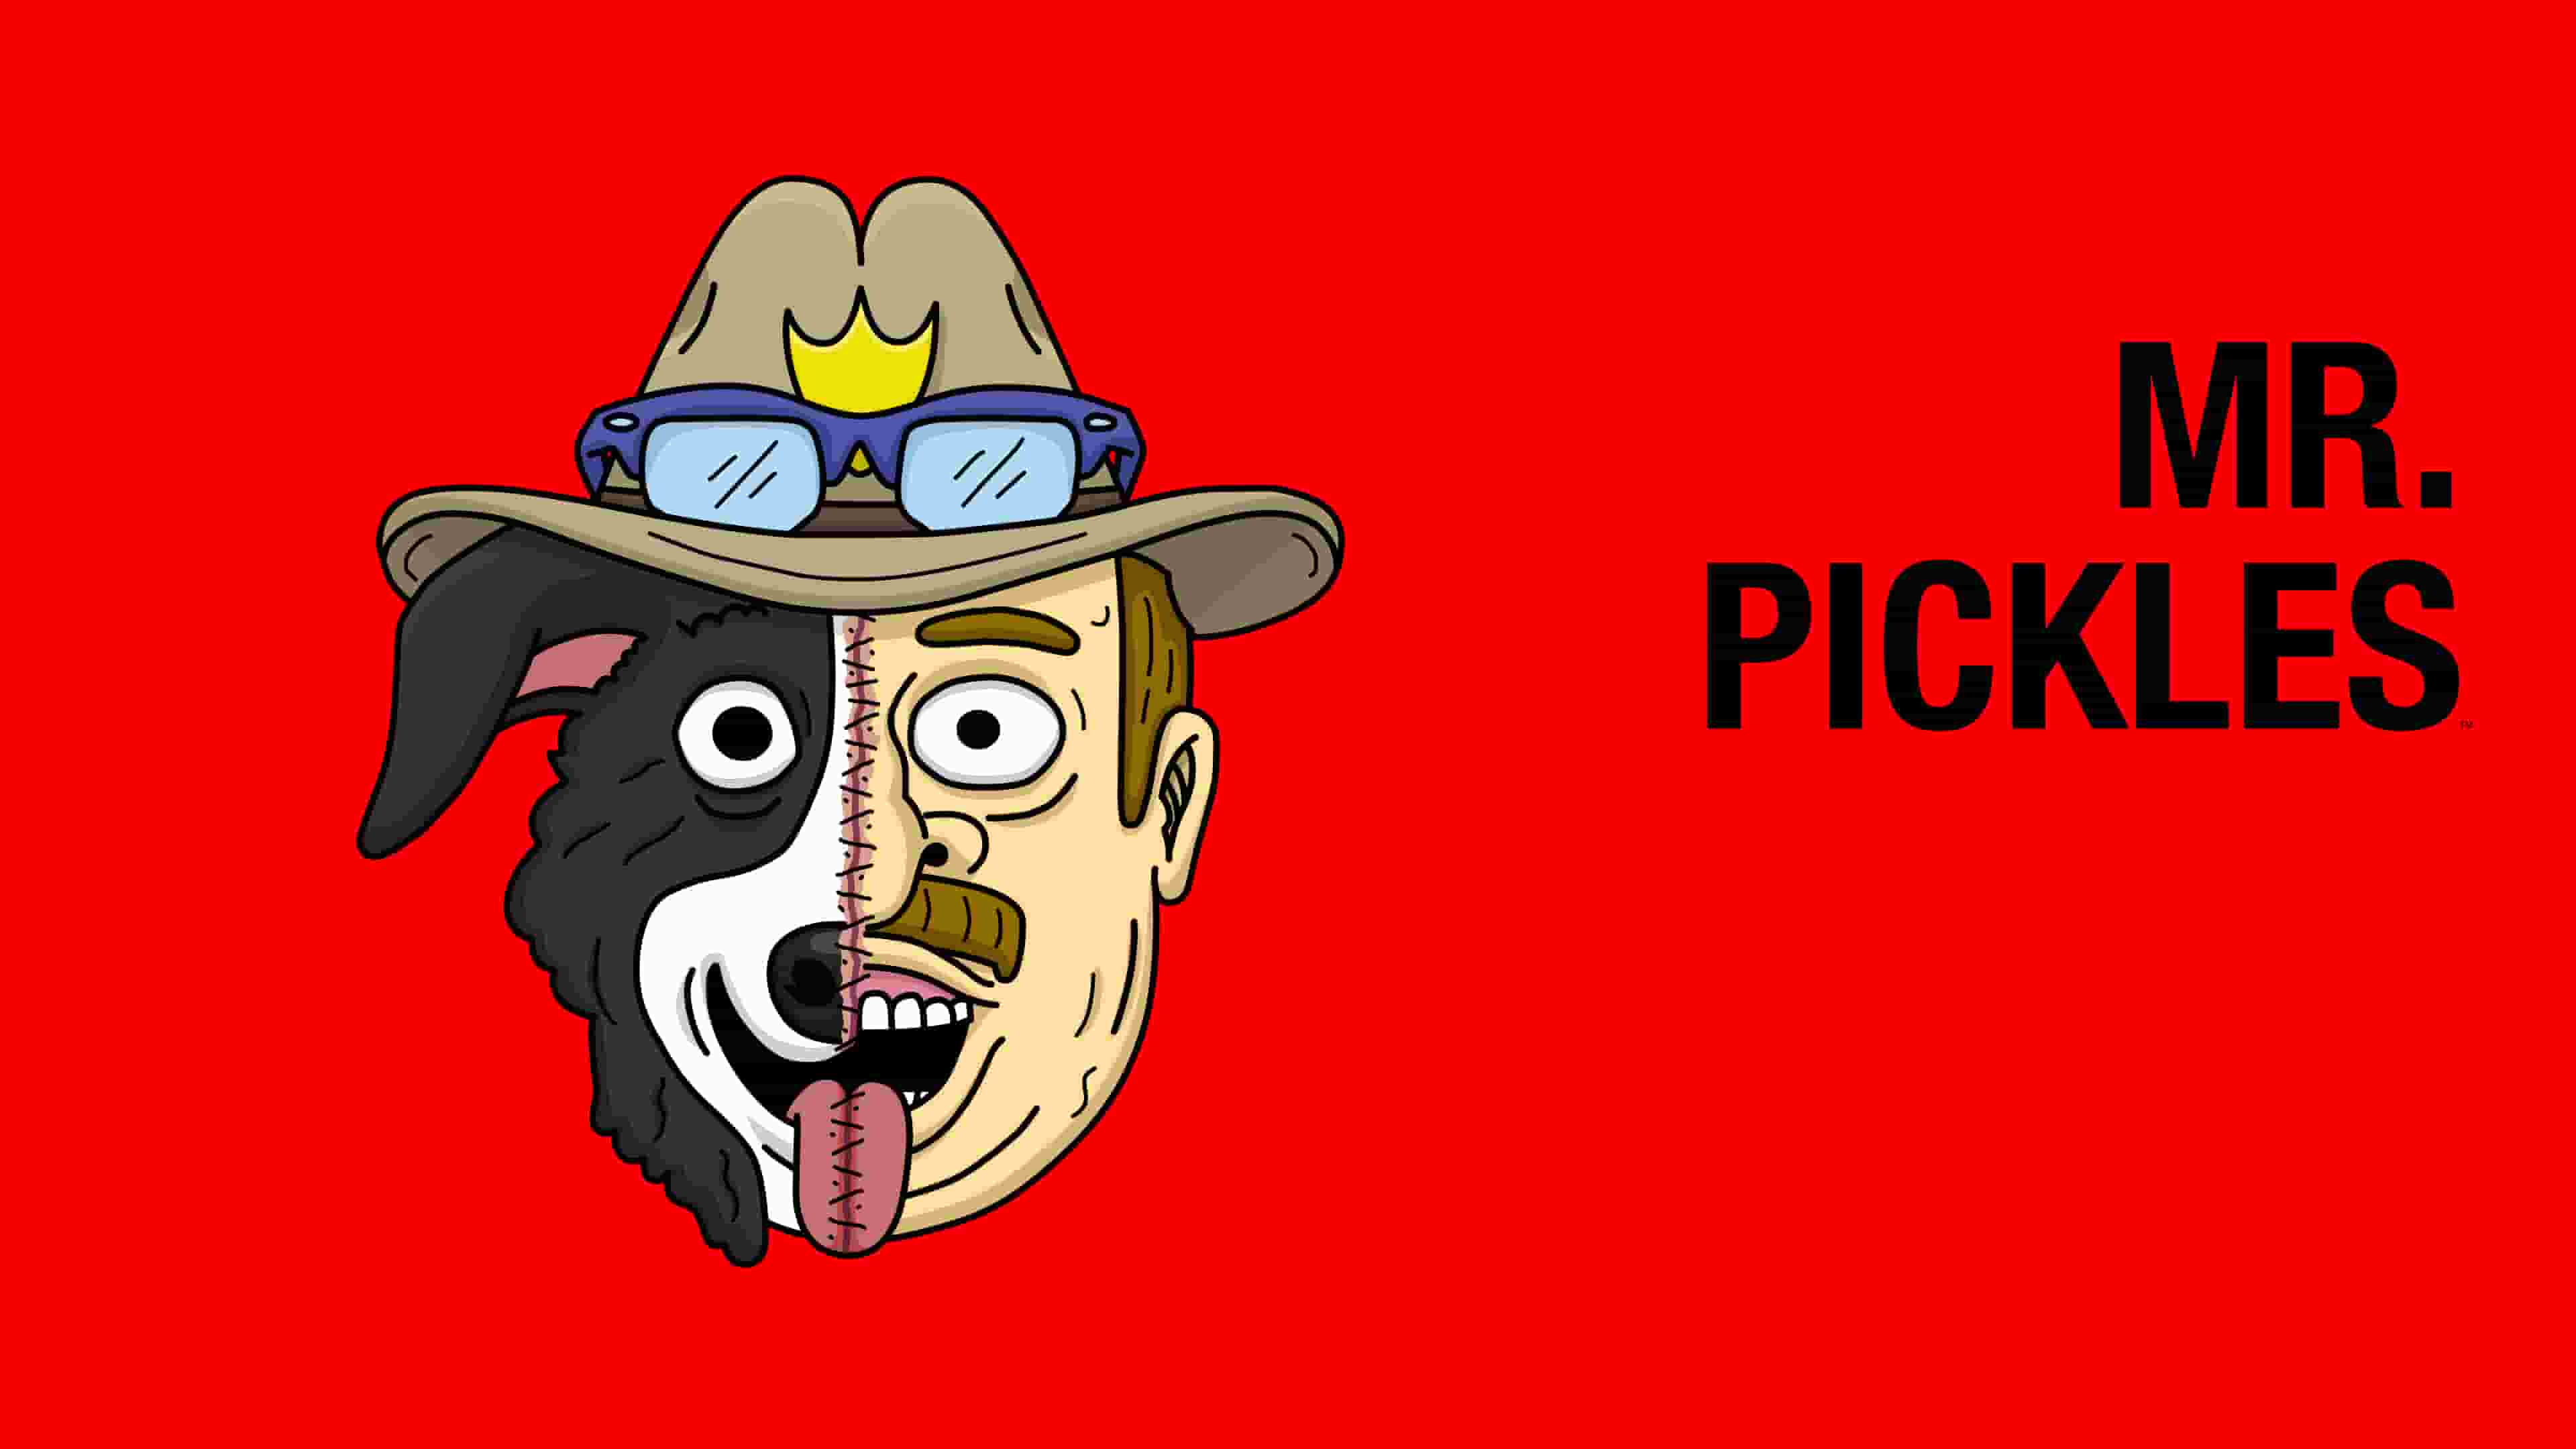 Title art from Adult Swim show Mr. Pickles